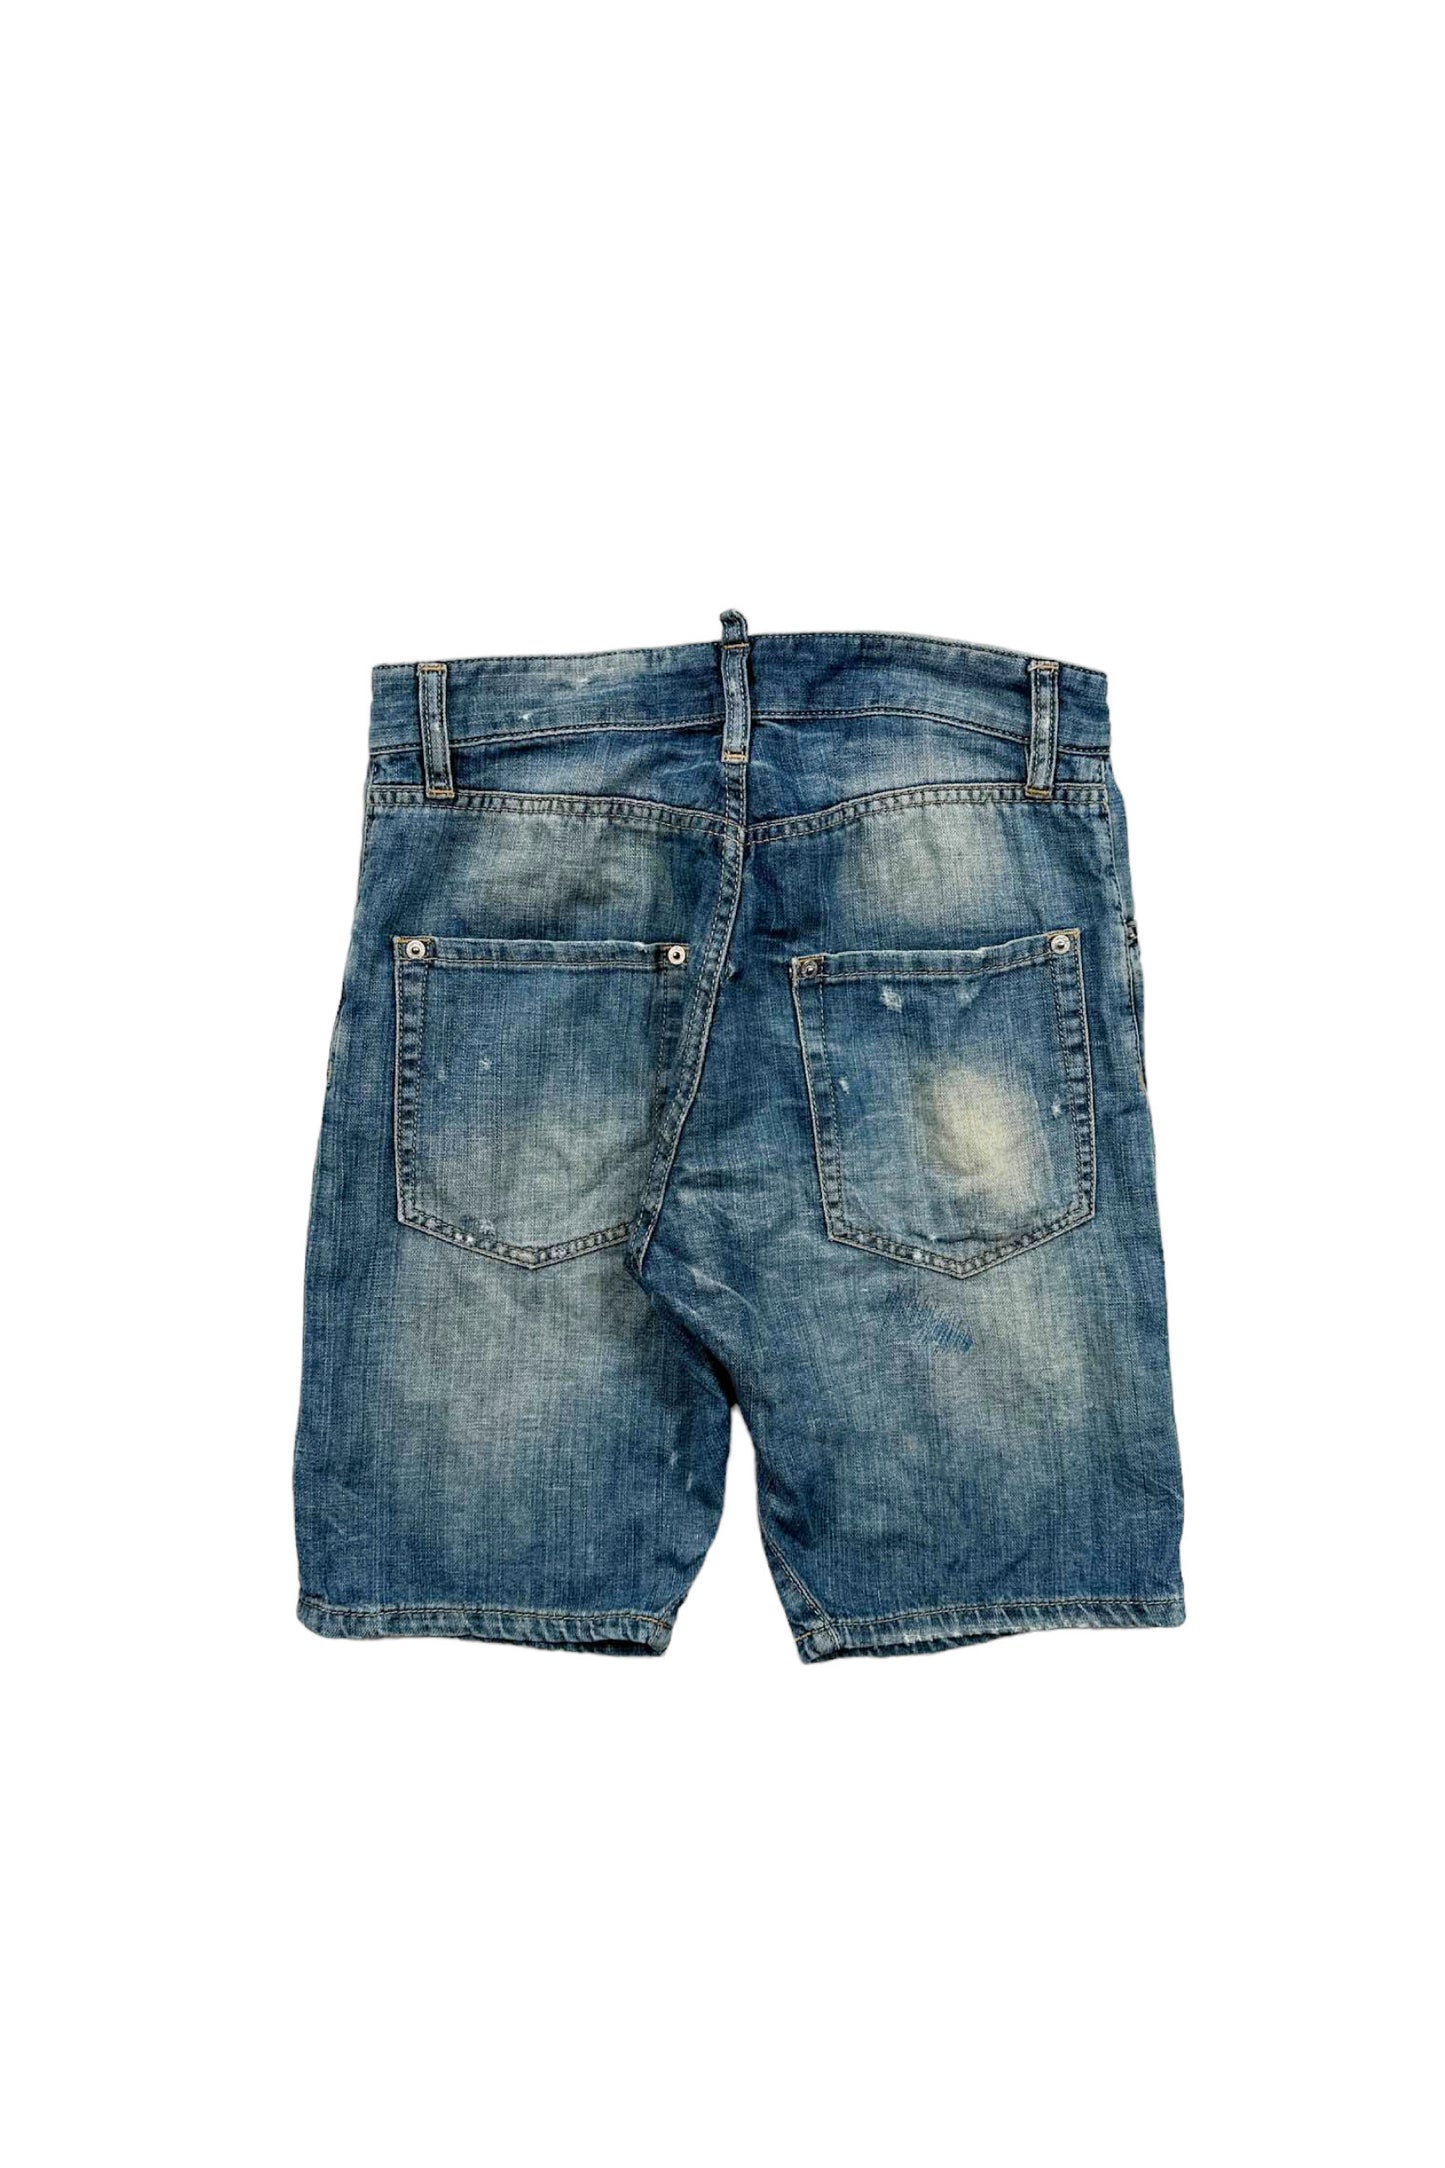 Made in ITALY DSQUARED2 half denim pants